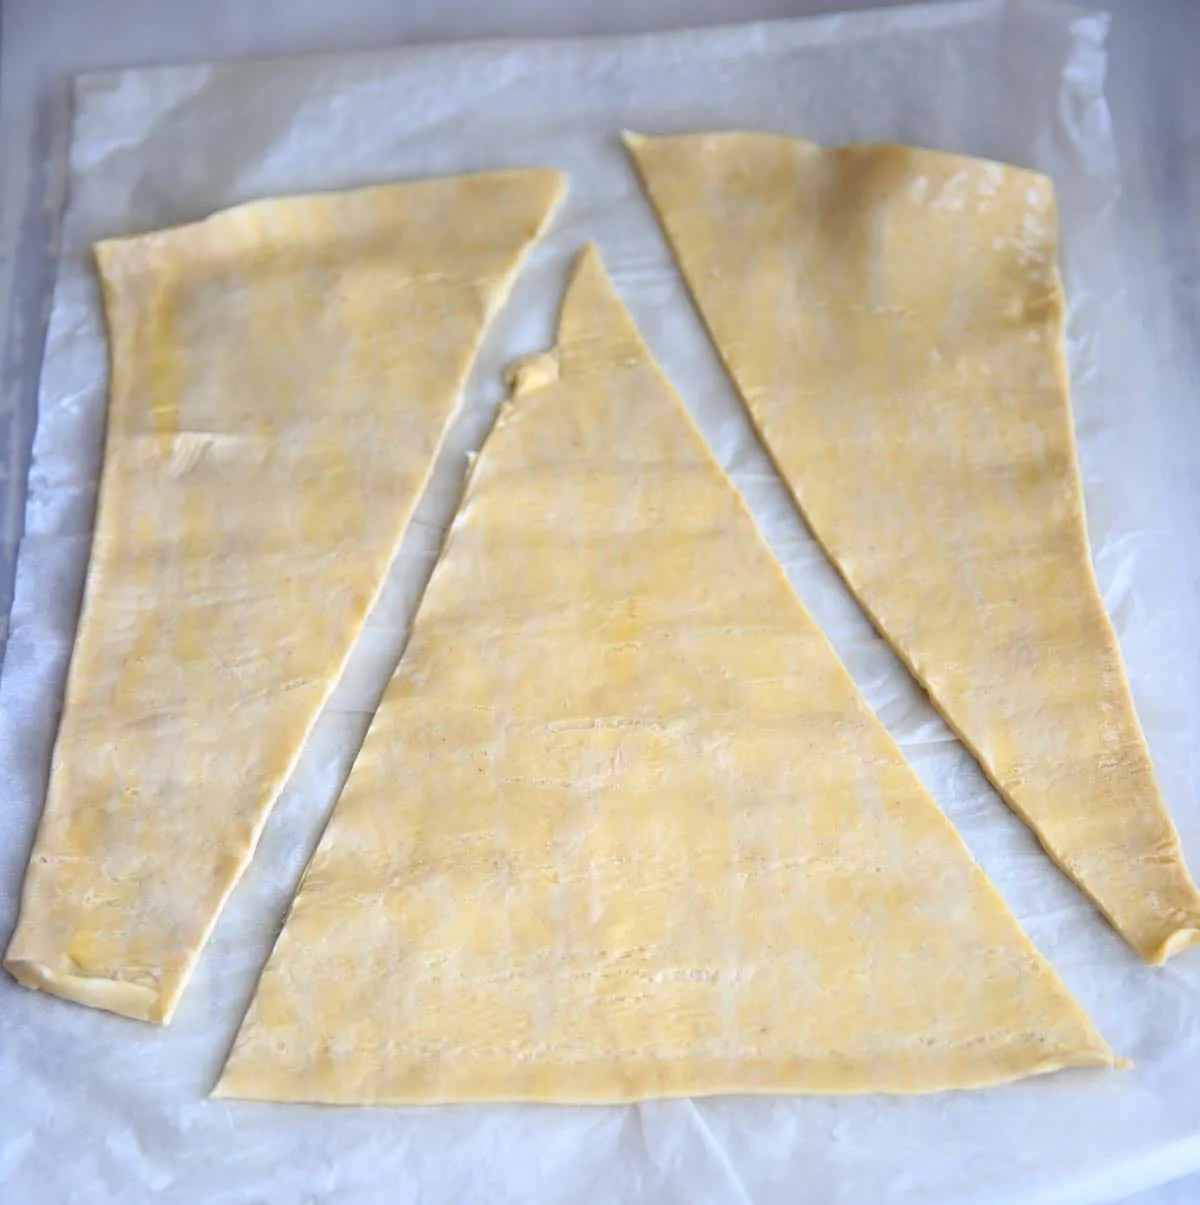 Cutting the puff pastry into triangles